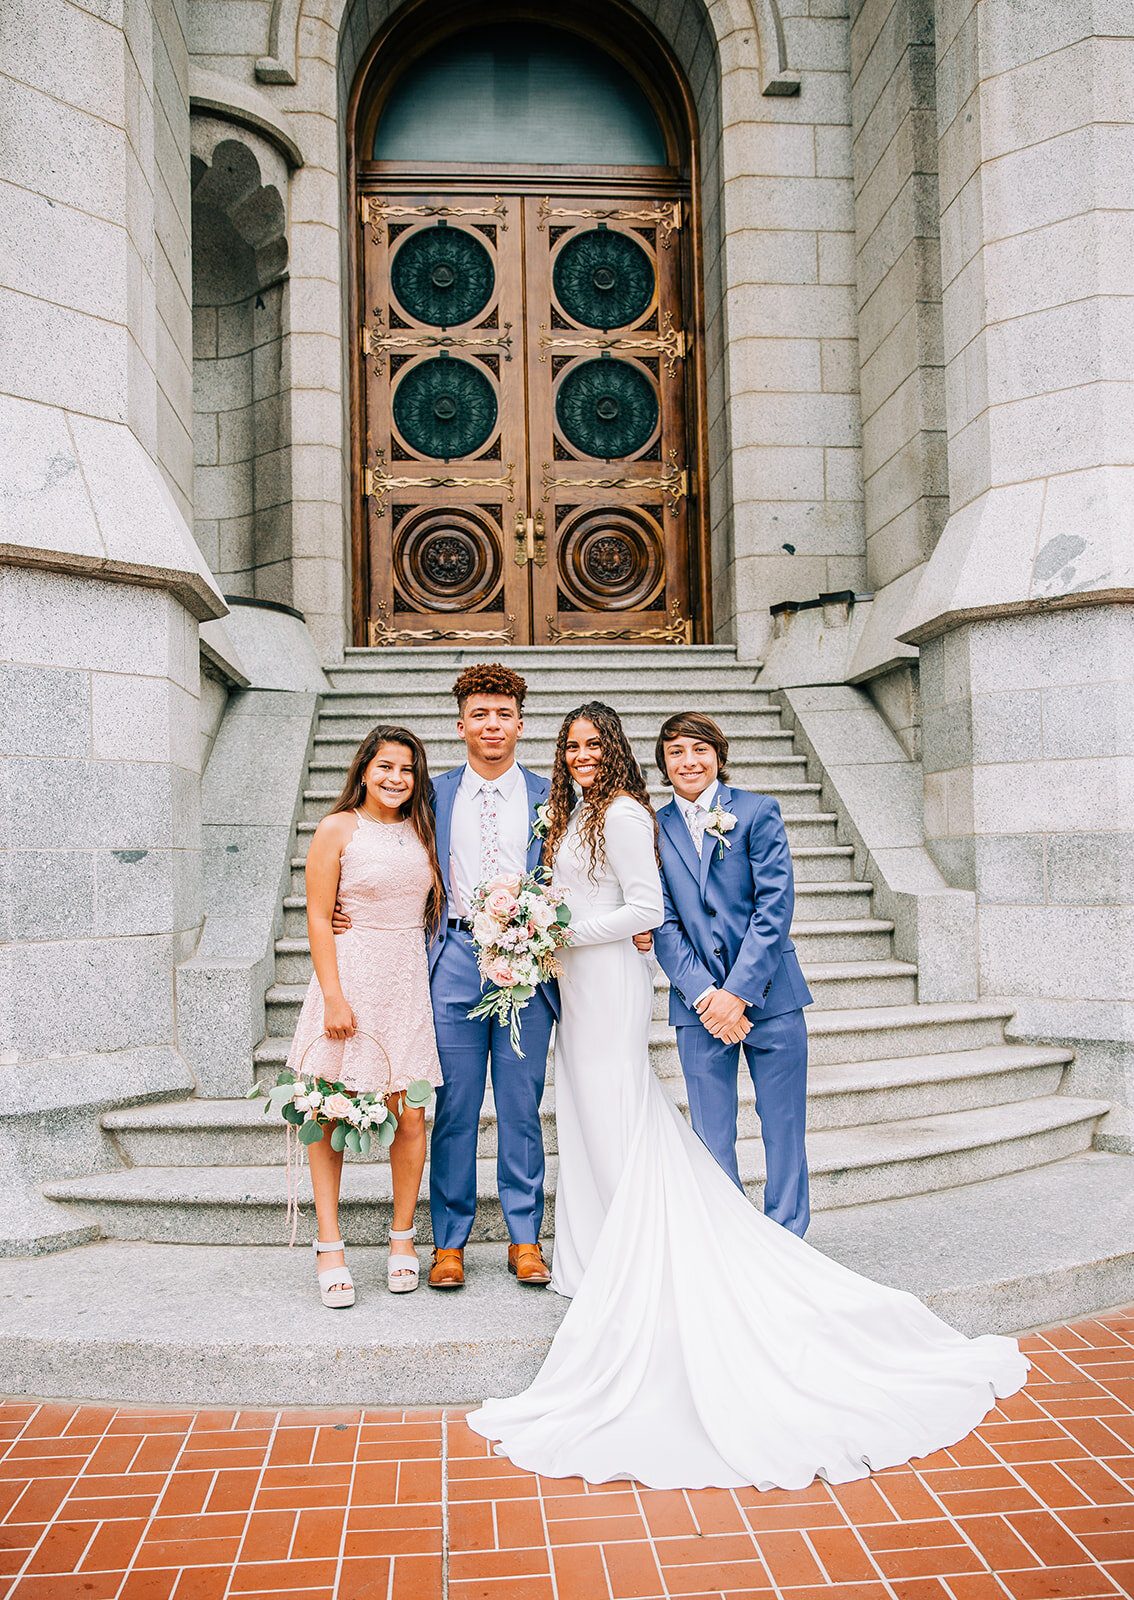  bride and groom standing with family blue suits wedding day style inspiration temple steps salt lake city utah wedding photographer blush dress long sleeve wedding gown bridal ensemble inspiration for curly hair brides young mormon newlyweds bride a